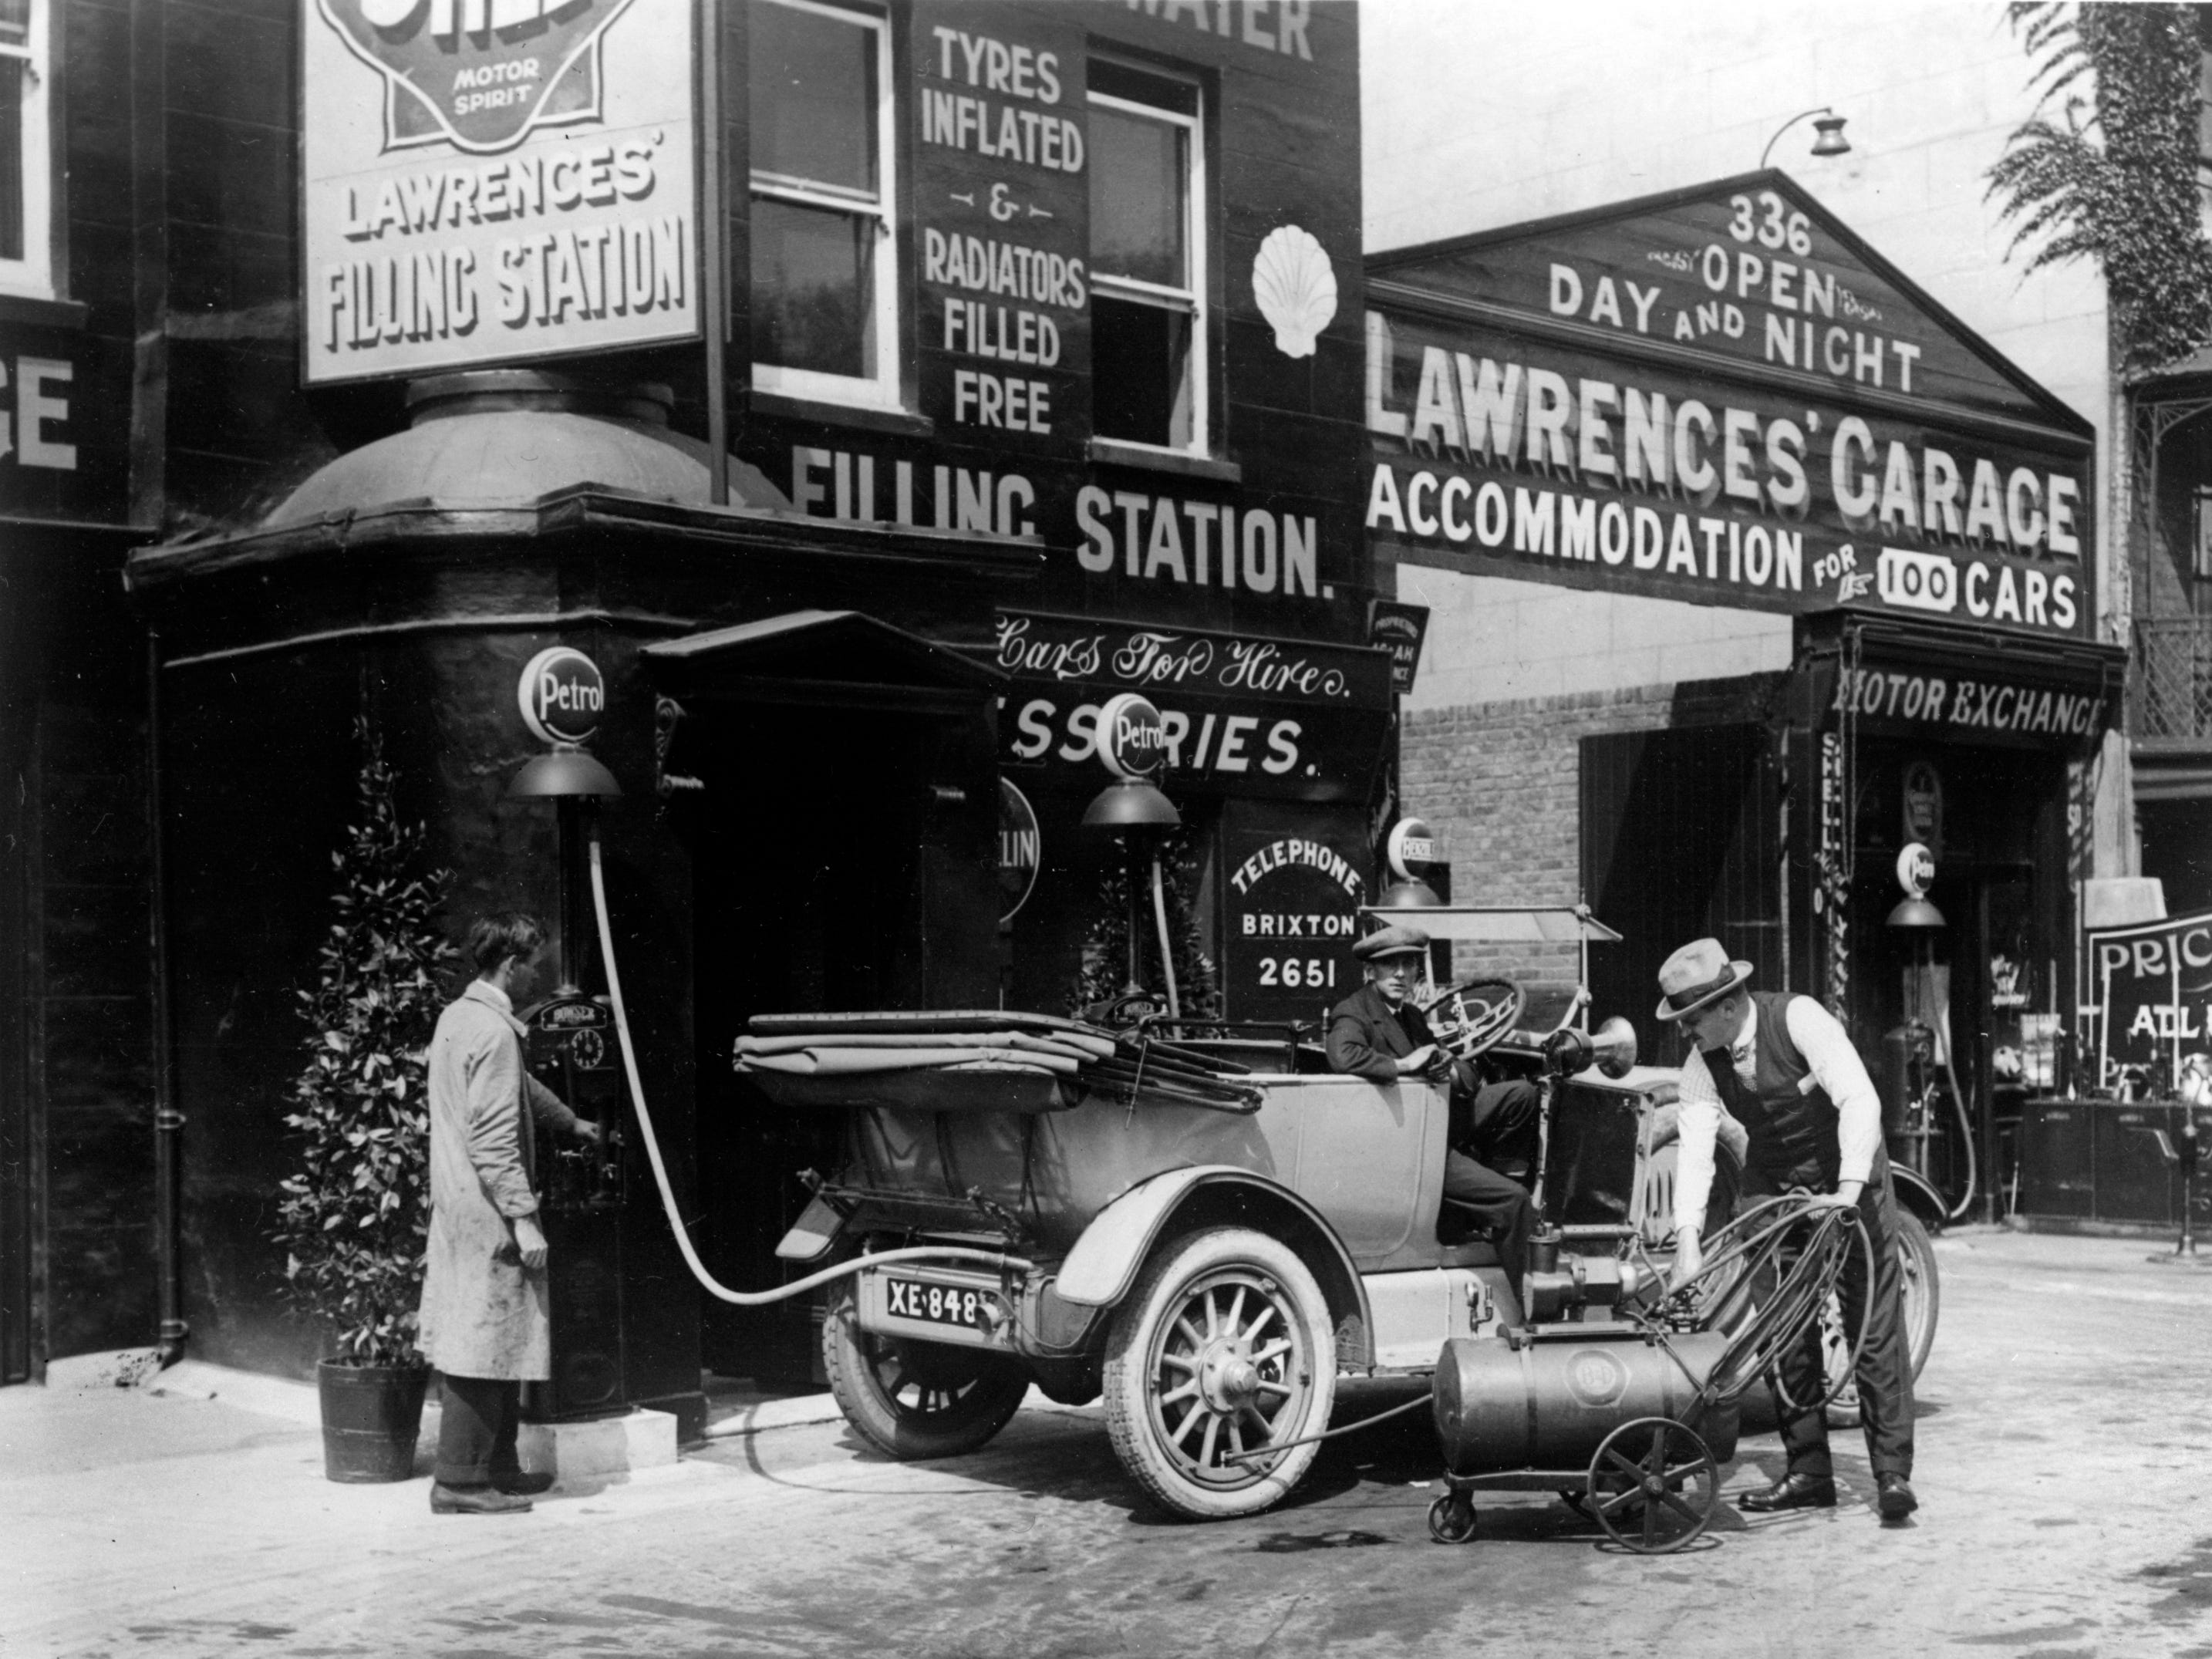 <p>In the 1920s, they began to be replaced with drive-in pumps to decrease traffic, according to the <a href="http://www.autolife.umd.umich.edu/Environment/E_Casestudy/E_casestudy8.htm">University of Michigan</a>.</p>